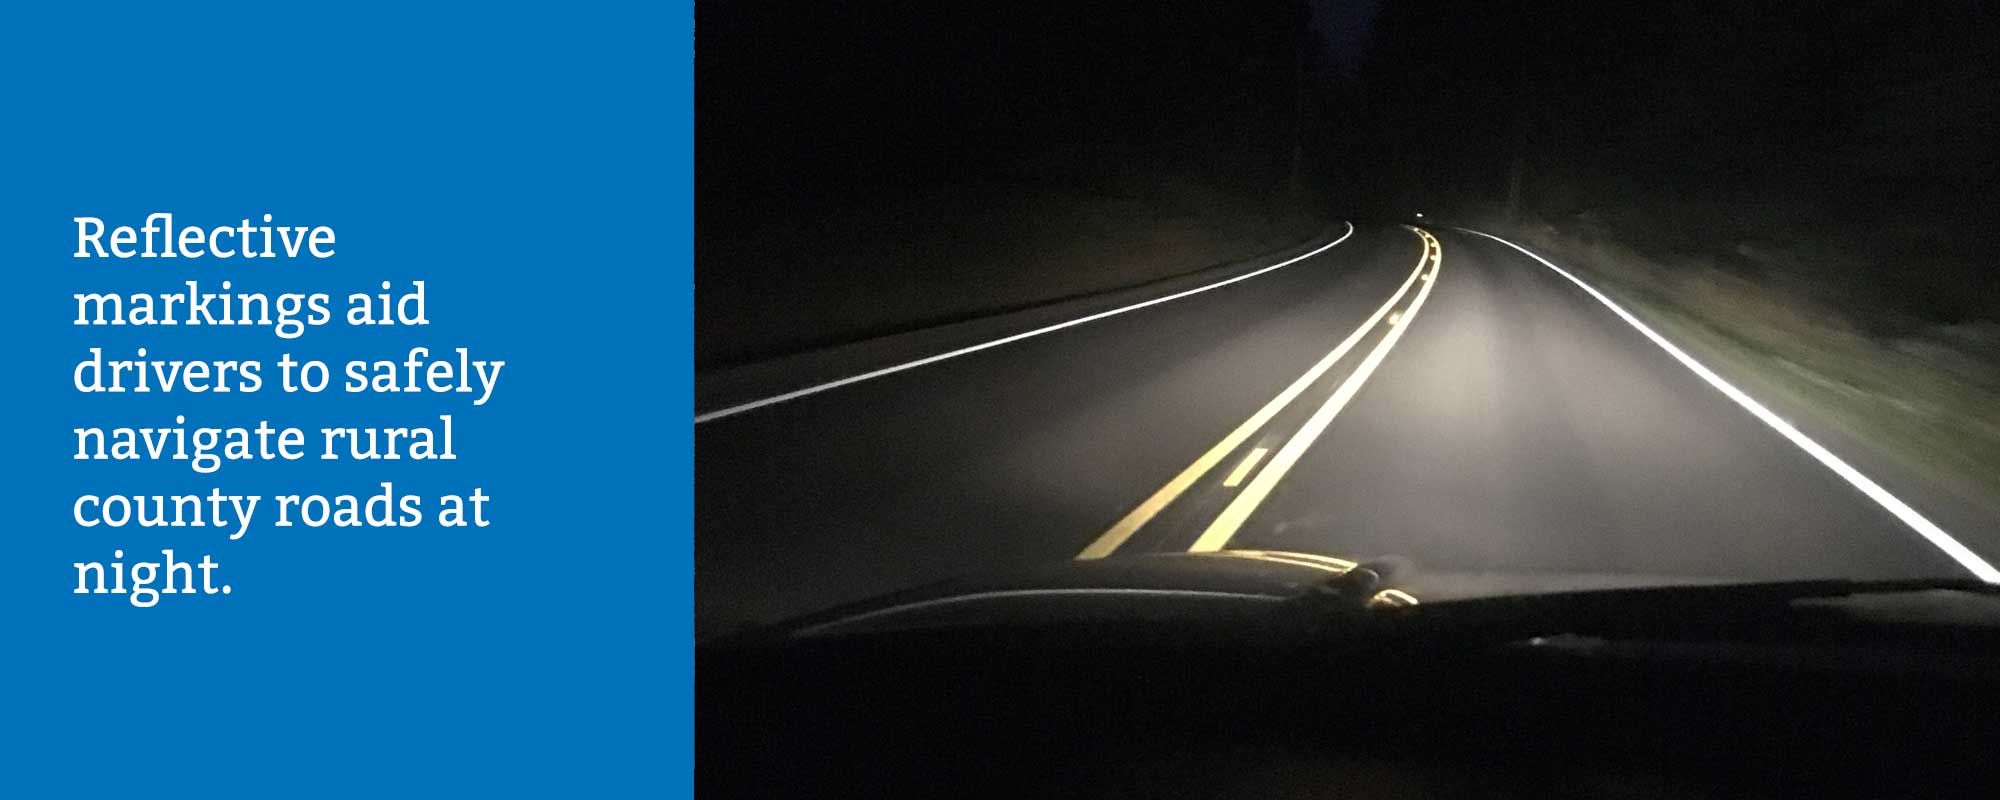 Reflective markings aid drivers to safely navigate rural county roads at night.